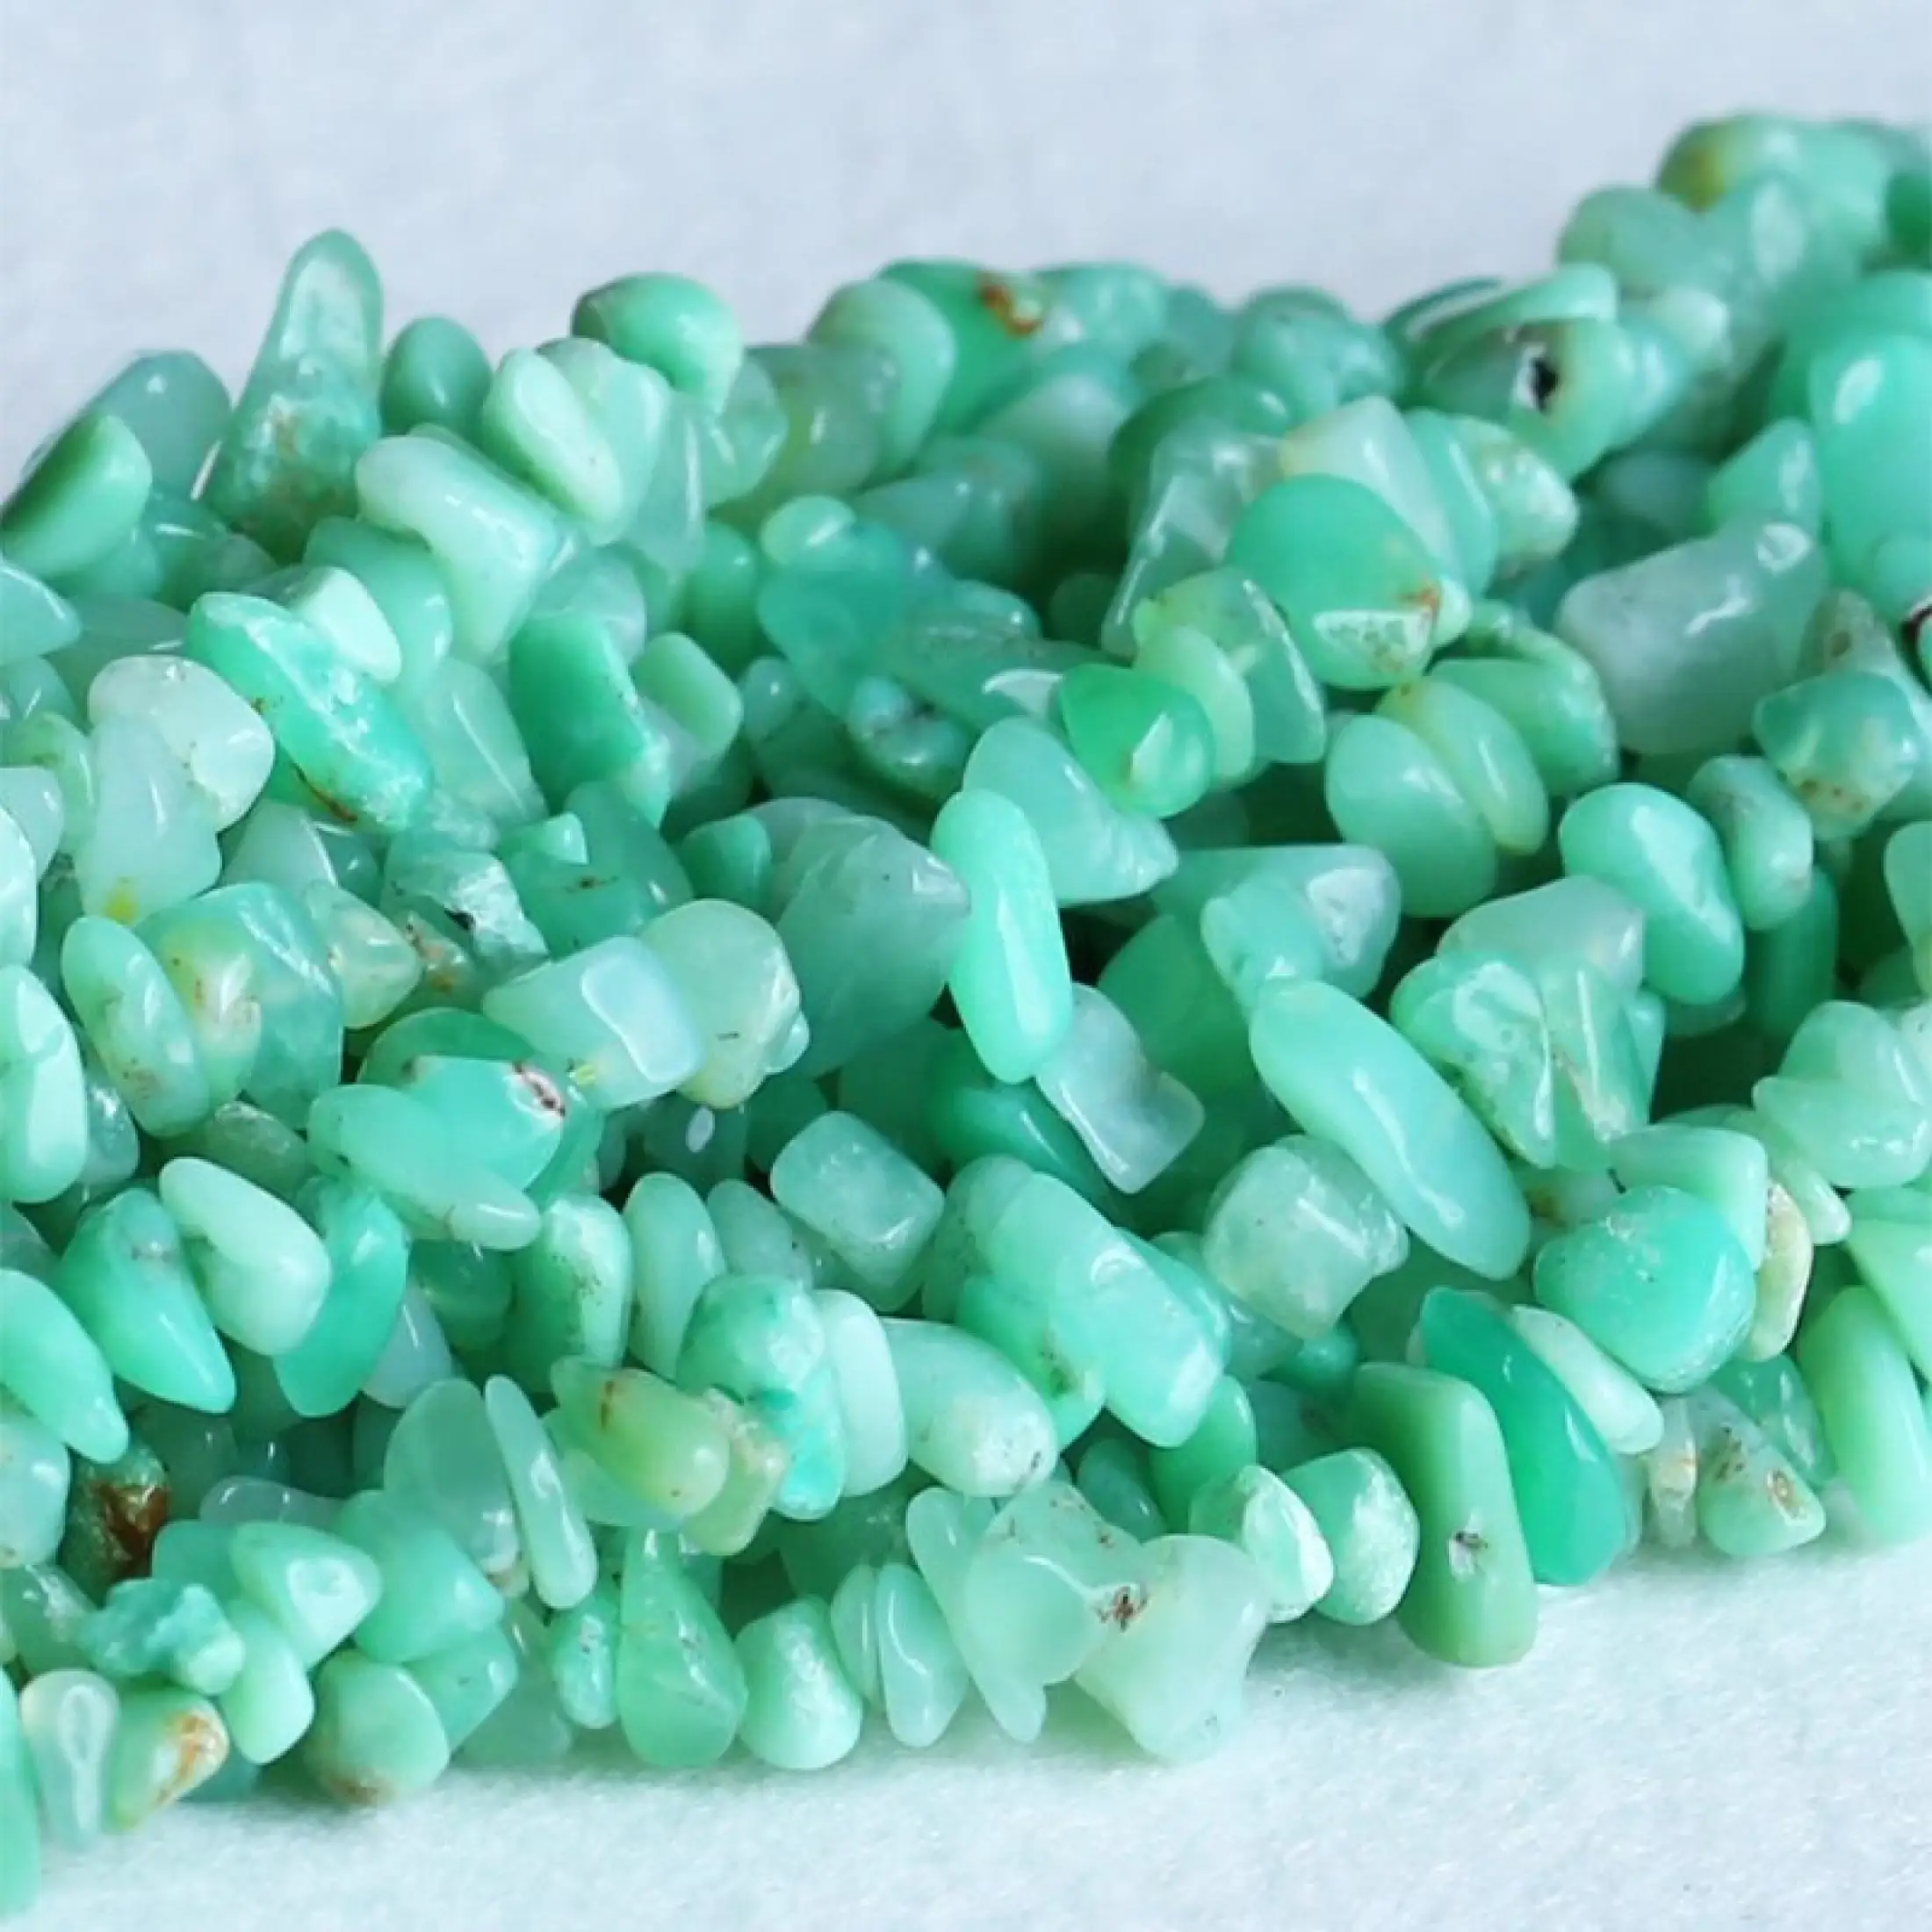 Amazonite Nugget Chip Beads 8mm 18mm